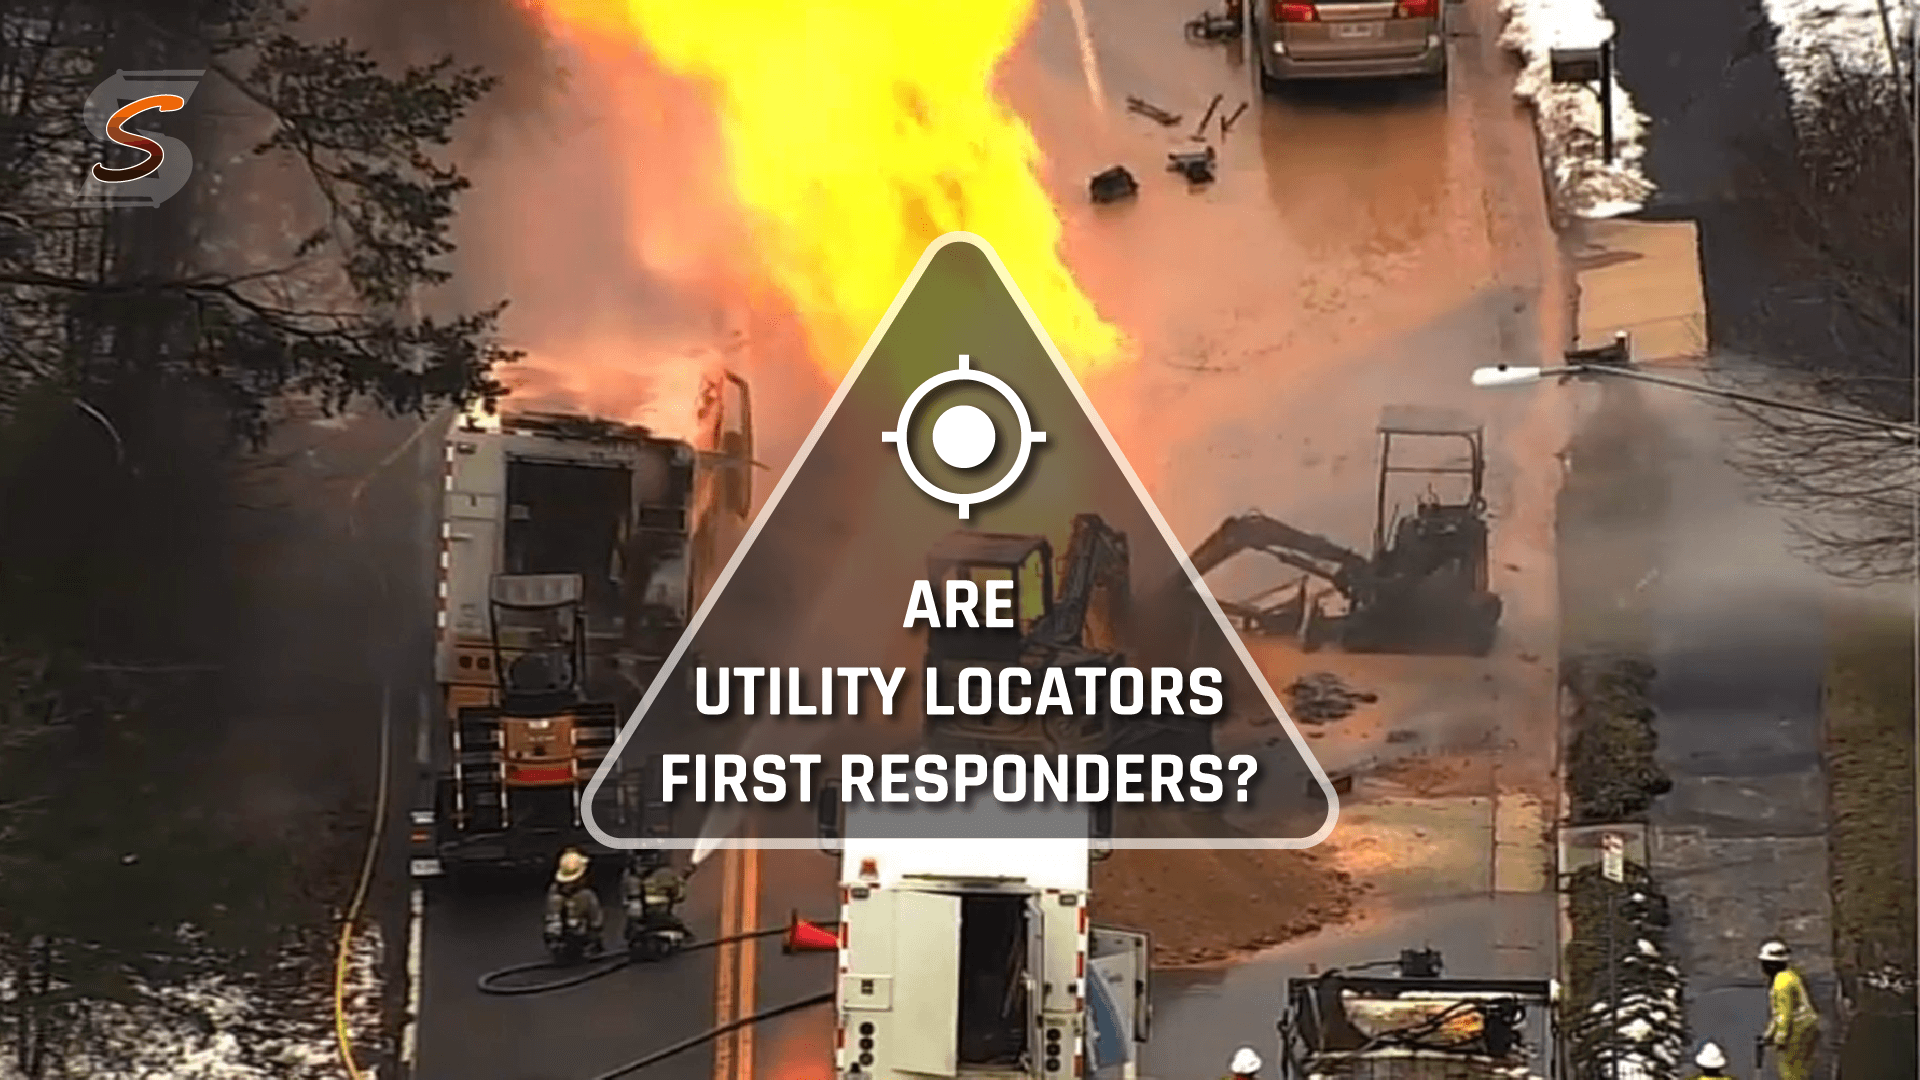 Featured image for “ARE UTILITY LOCATORS FIRST RESPONDERS?”